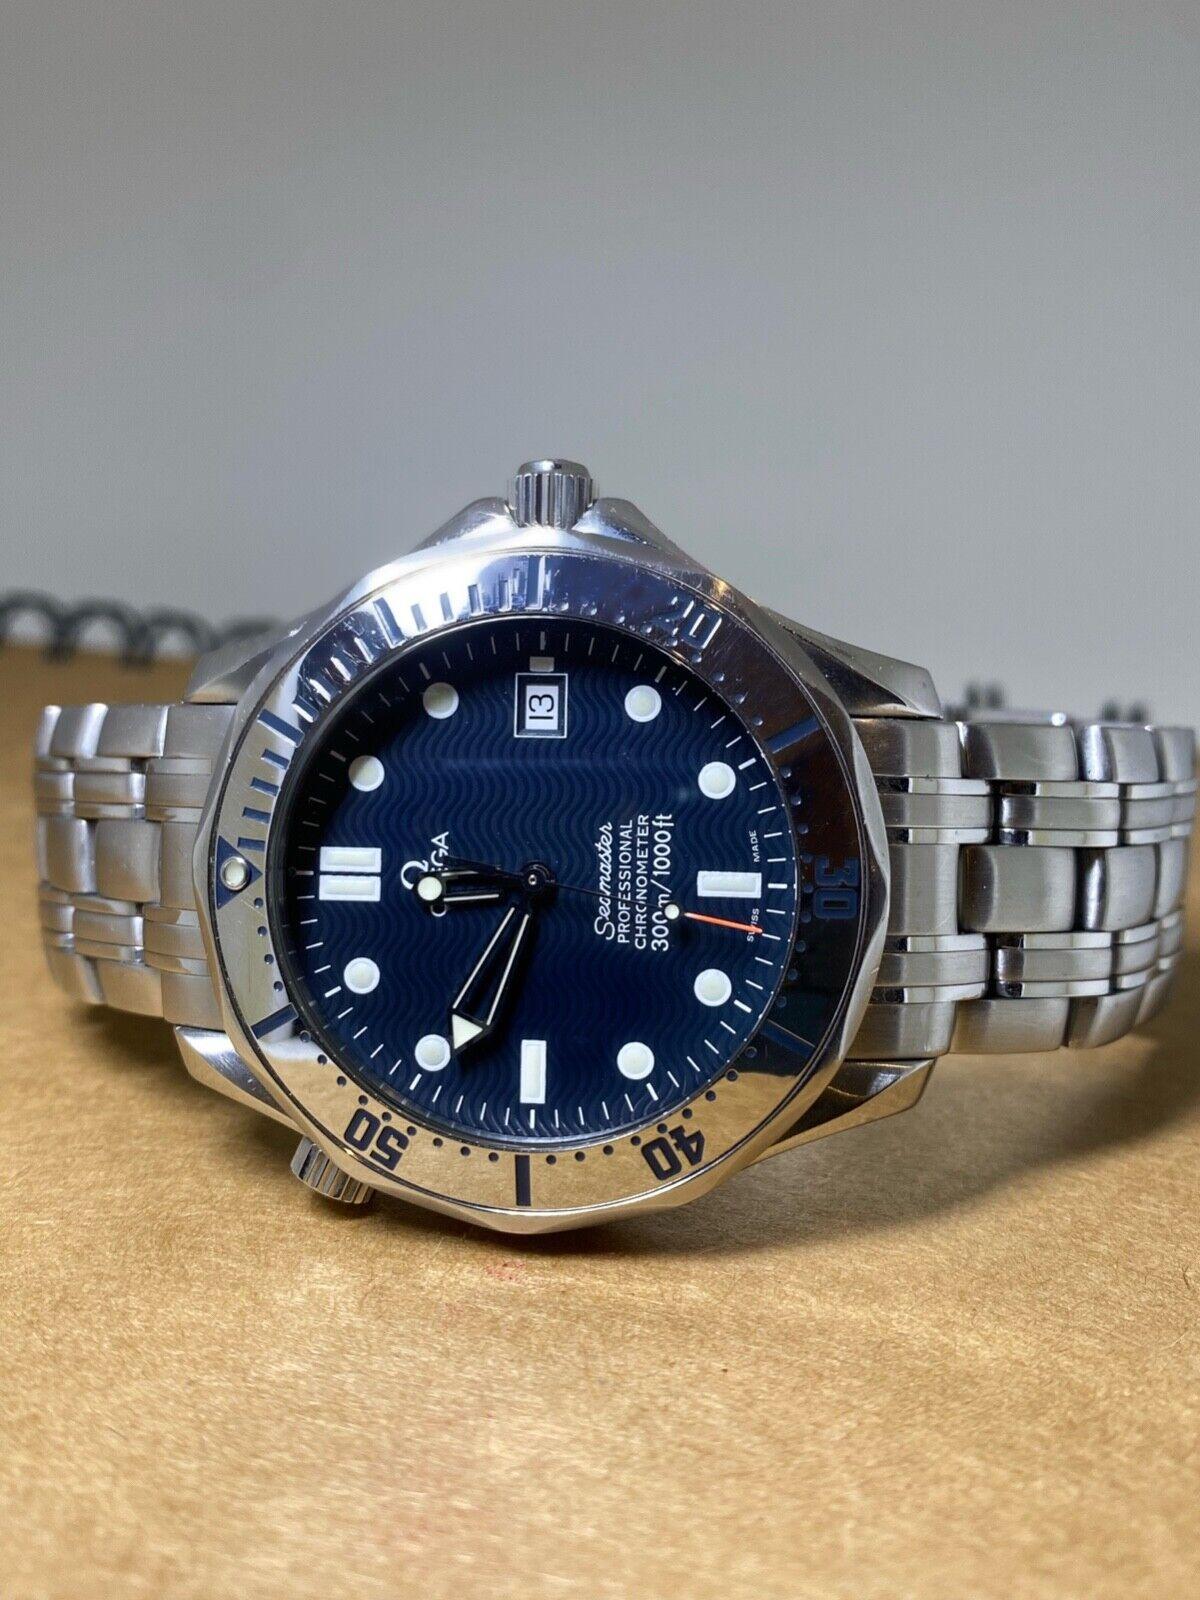  This truly iconic & highly sought after 
Omega Seamaster Professional 300m,
nicknamed 